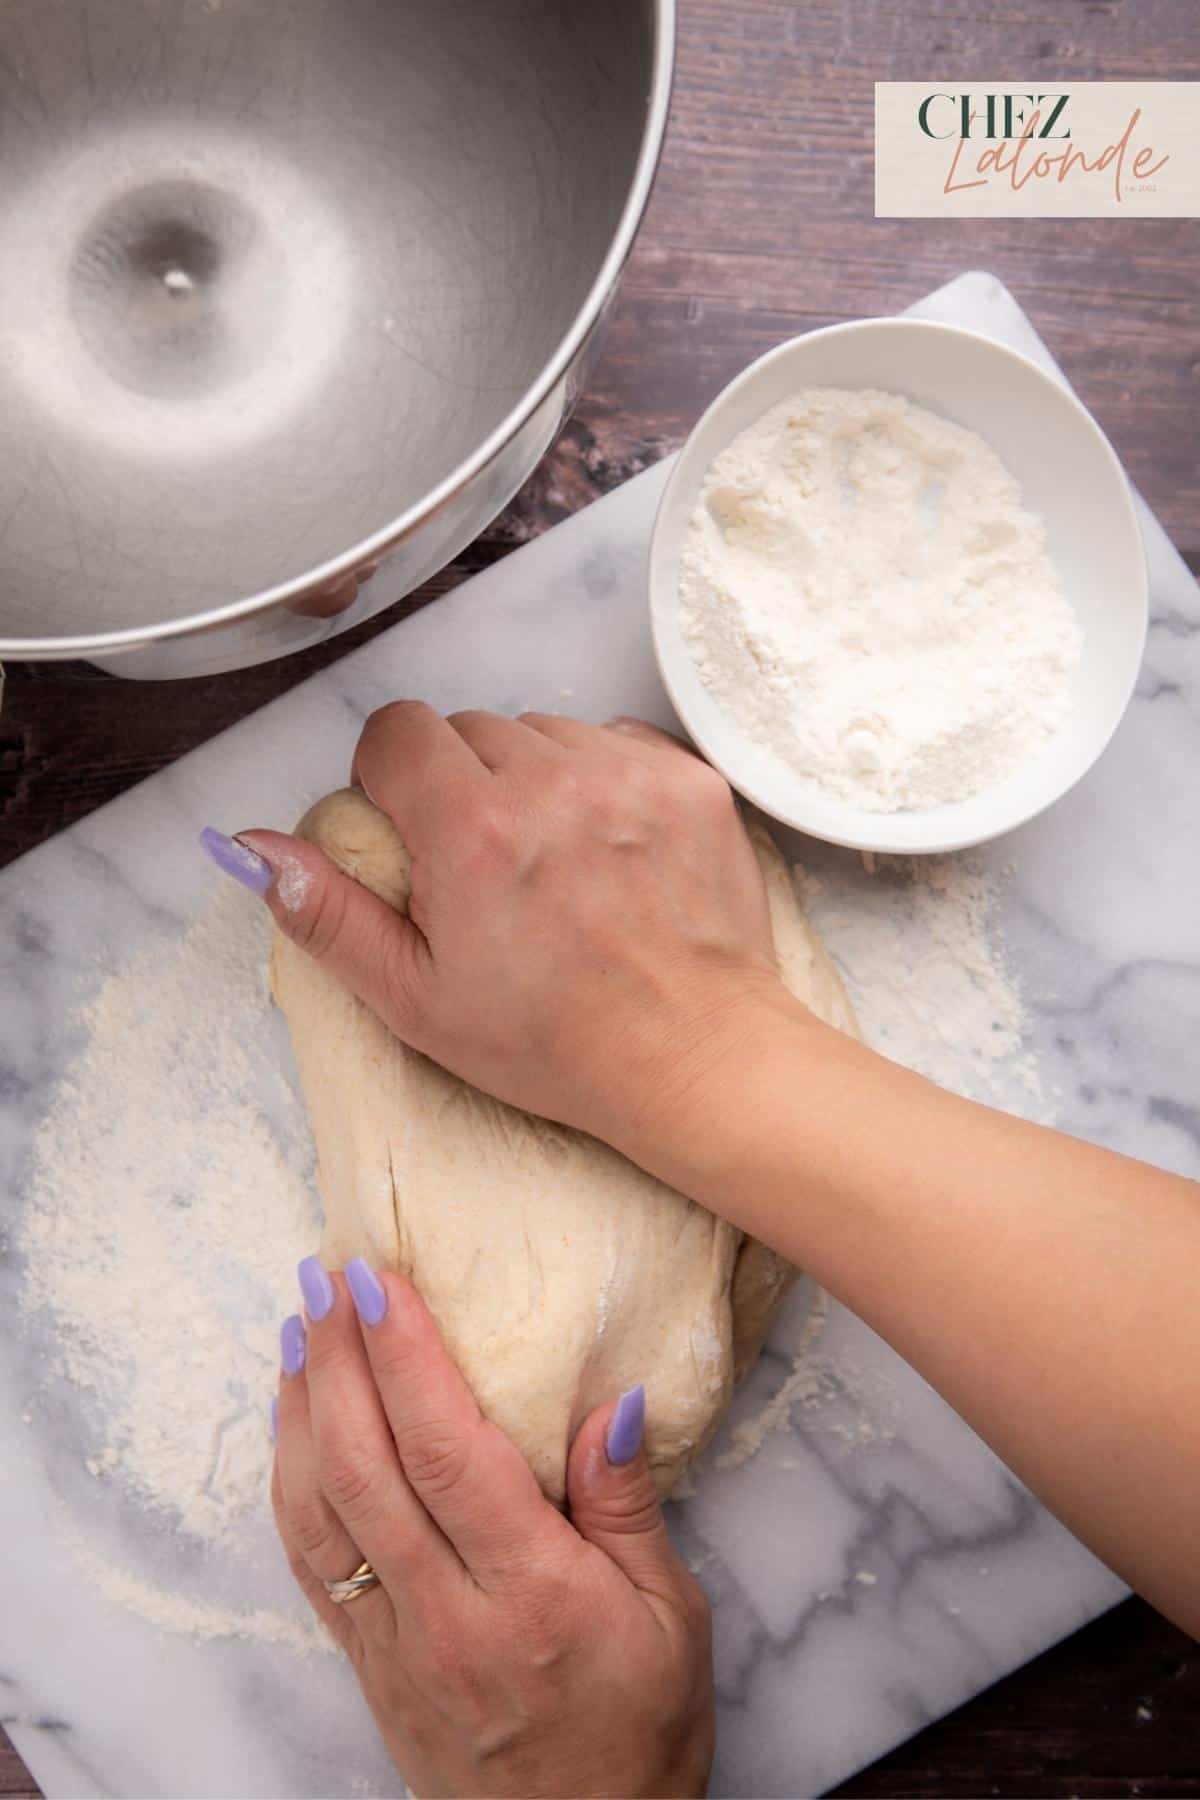 After shaping in the standmixer, knead it some more with your hand.